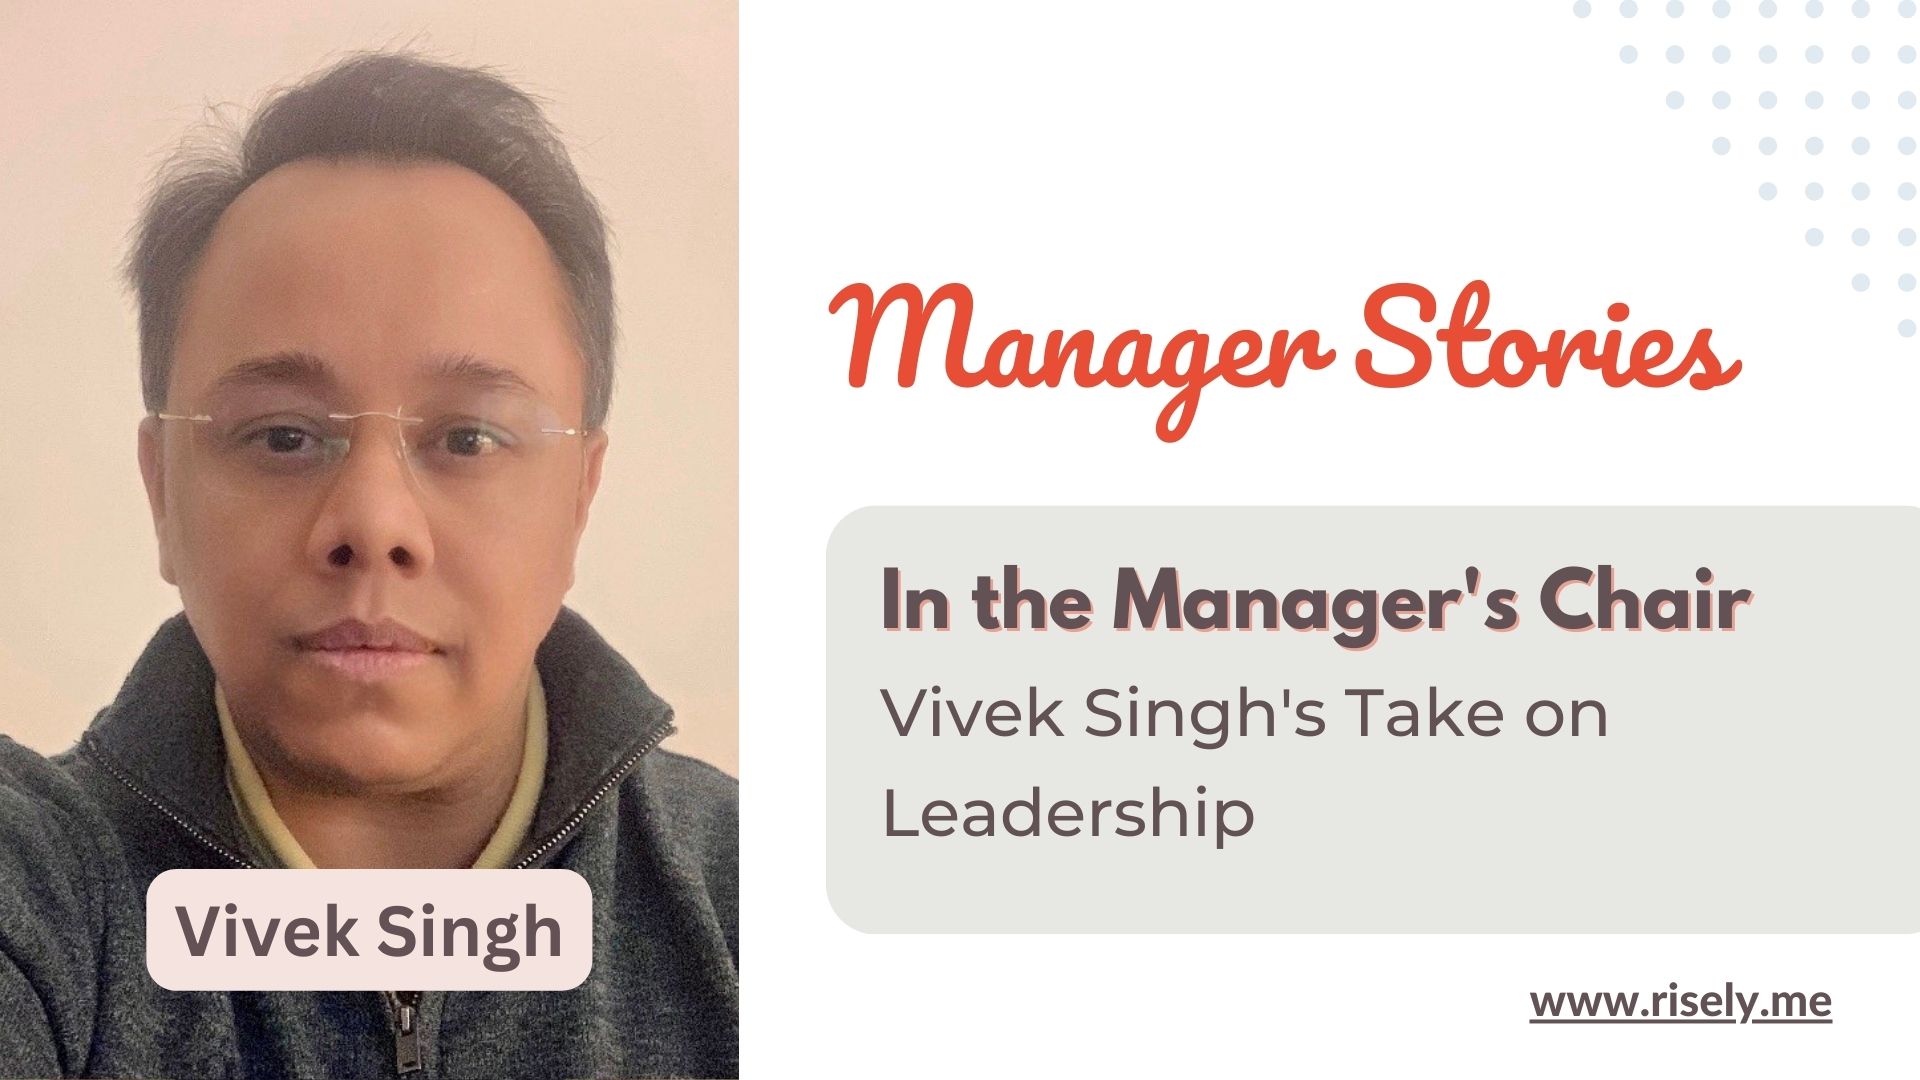 In the Manager’s Chair: Vivek Singh’s Take on Leadership